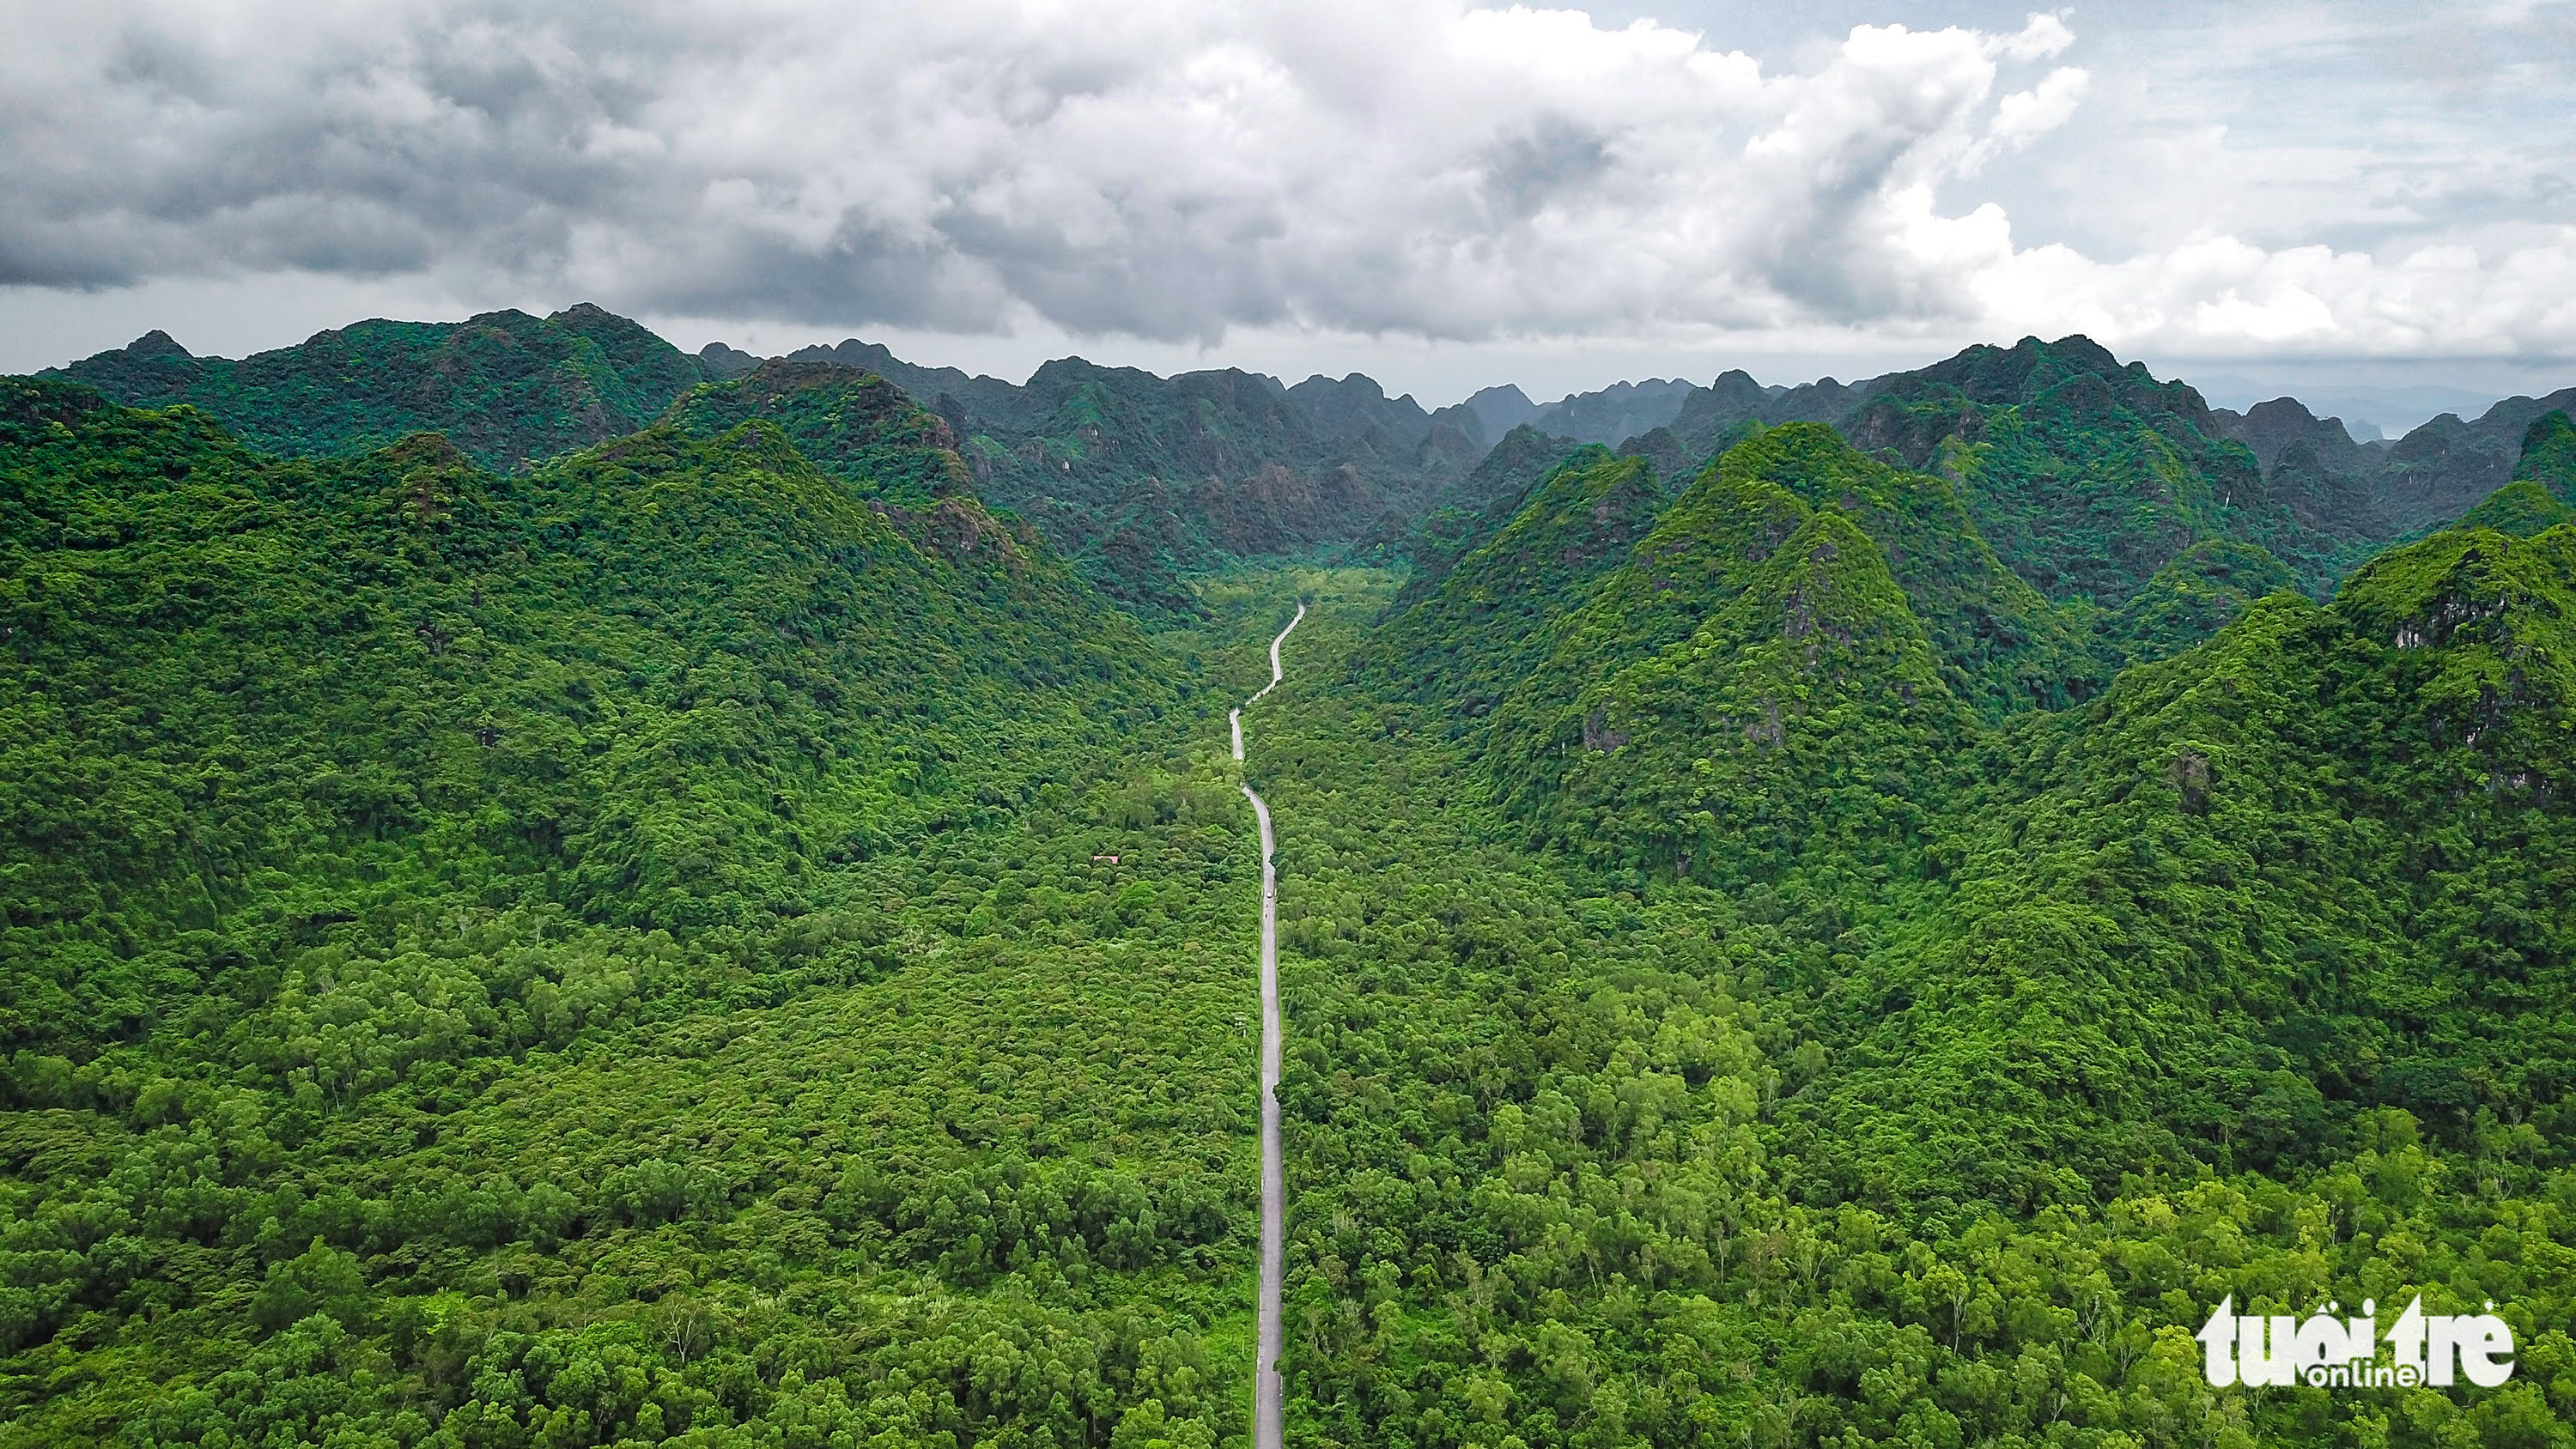 The 25-kilometer coastal road runs features gentle cliffs and views of the evergreen trees which rise out of Cat Ba National Park. Photo: Nam Tran / Tuoi Tre